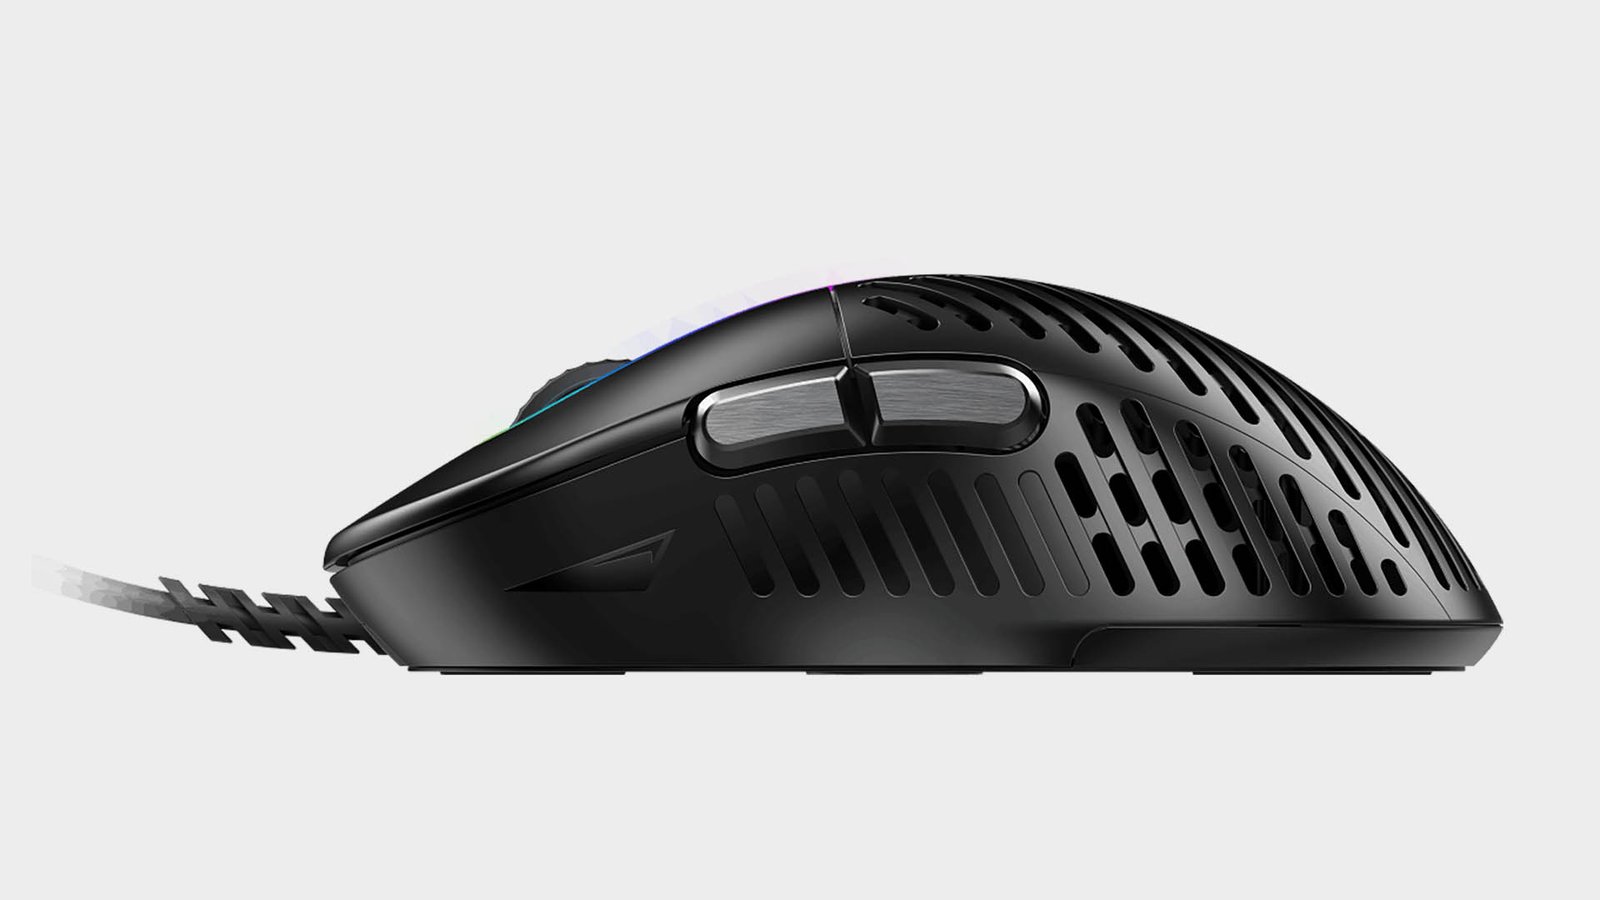 Mountain Makalu 67 gaming mouse from various angles on grey background